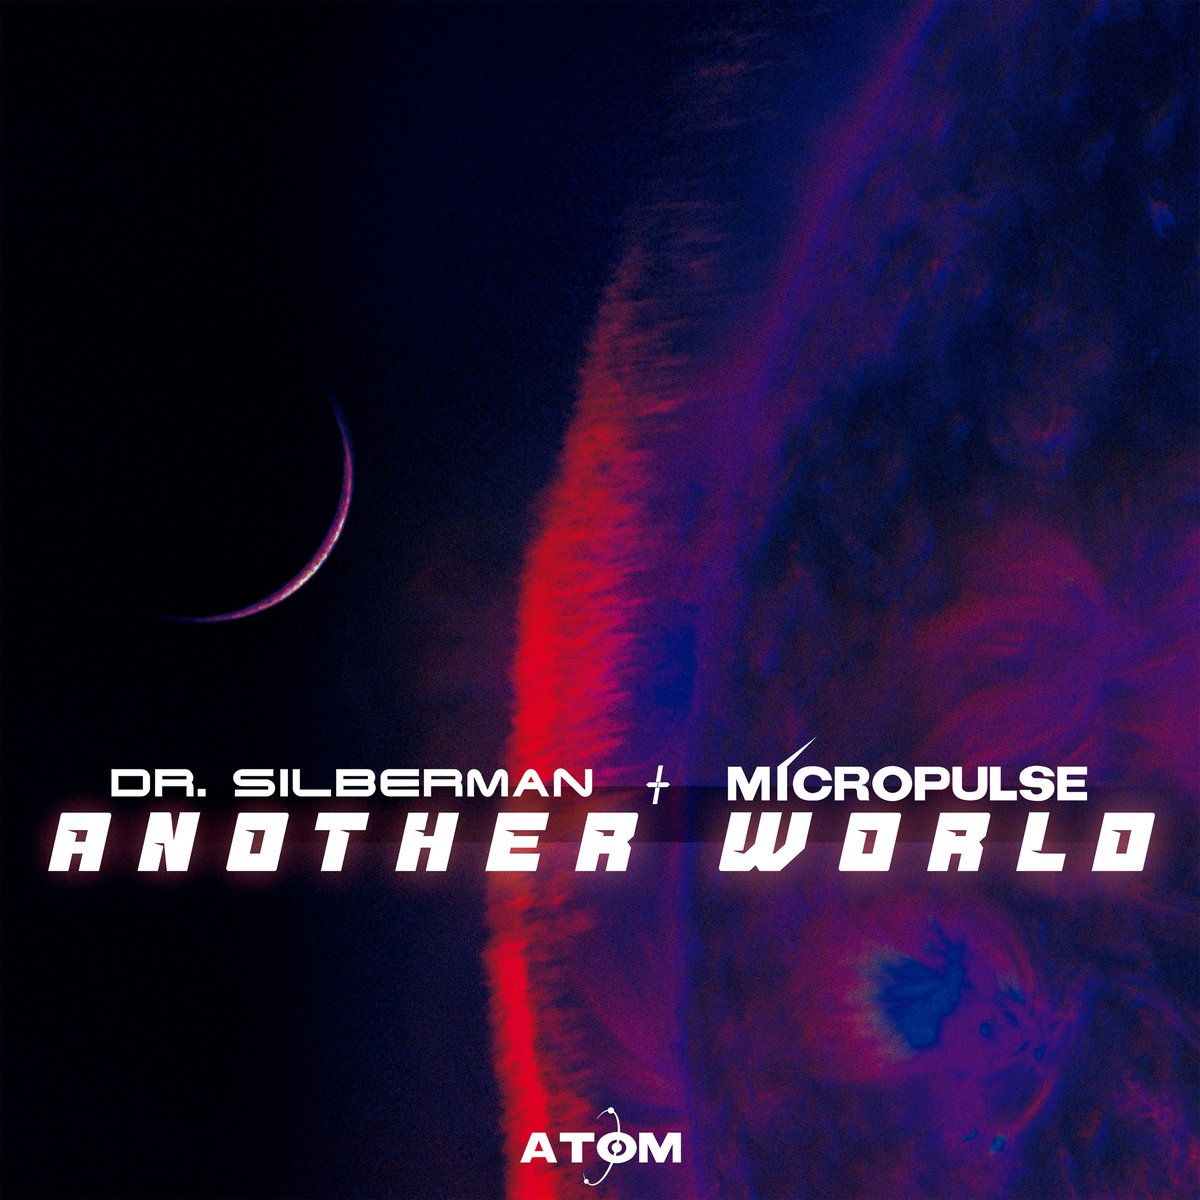 Image of Dr. Silberman & Micropulse - Another World (ATF010) Vinyl & Digital